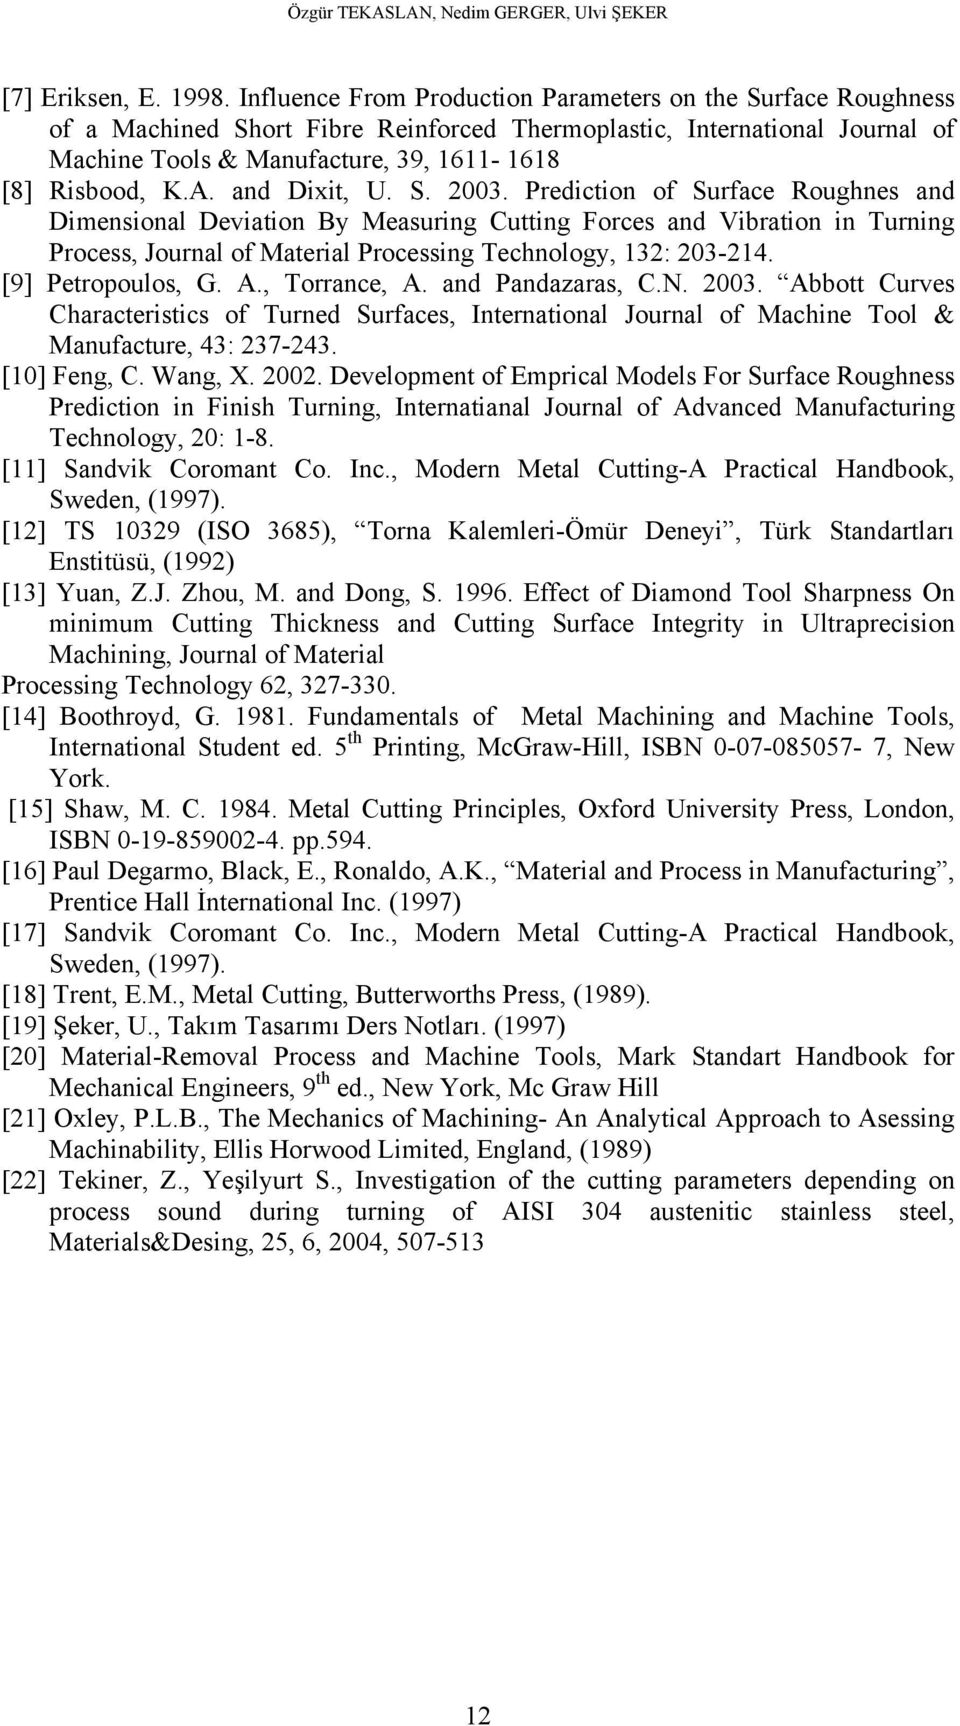 and Dixit, U. S. 2003. Prediction of Surface Roughnes and Dimensional Deviation By Measuring Cutting Forces and Vibration in Turning Process, Journal of Material Processing Technology, 132: 203-214.